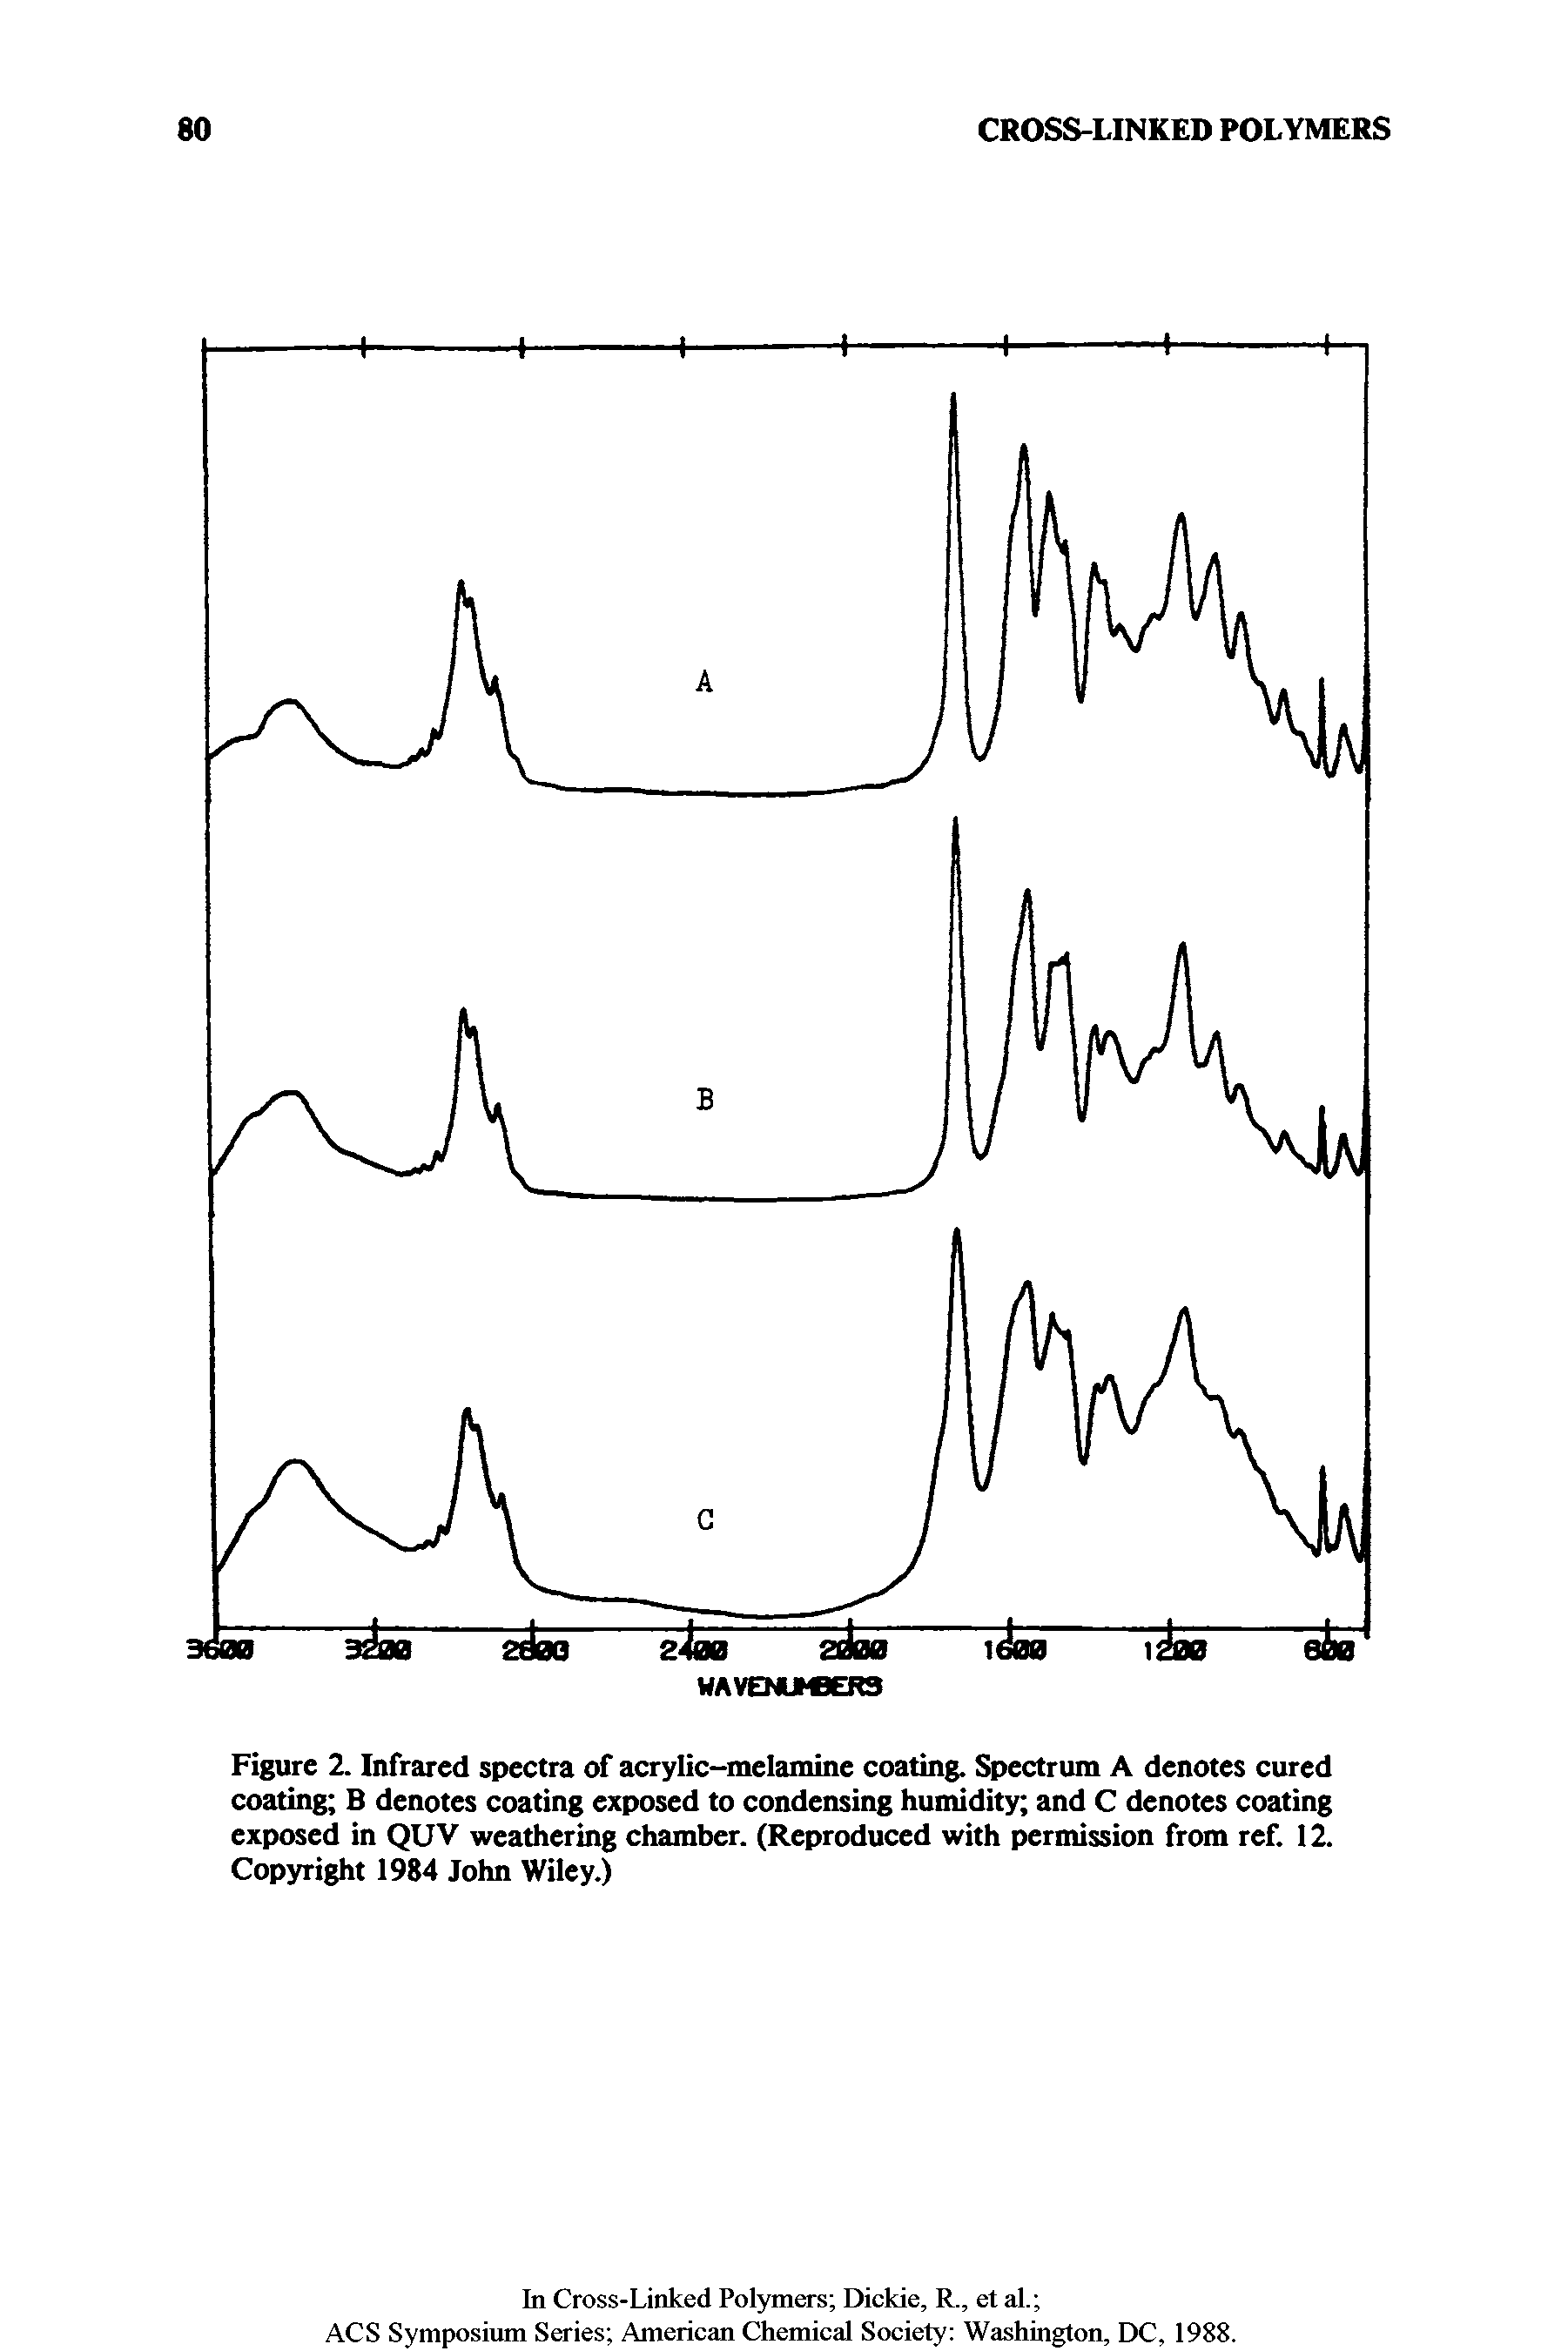 Figure 2. Infrared spectra of acrylic-melamine coating. Spectrum A denotes cured coating B denotes coating exposed to condensing humidity and C denotes coating exposed in QUV weathering chamber. (Reproduced with permission from ref. 12. Copyright 1984 John Wiley.)...